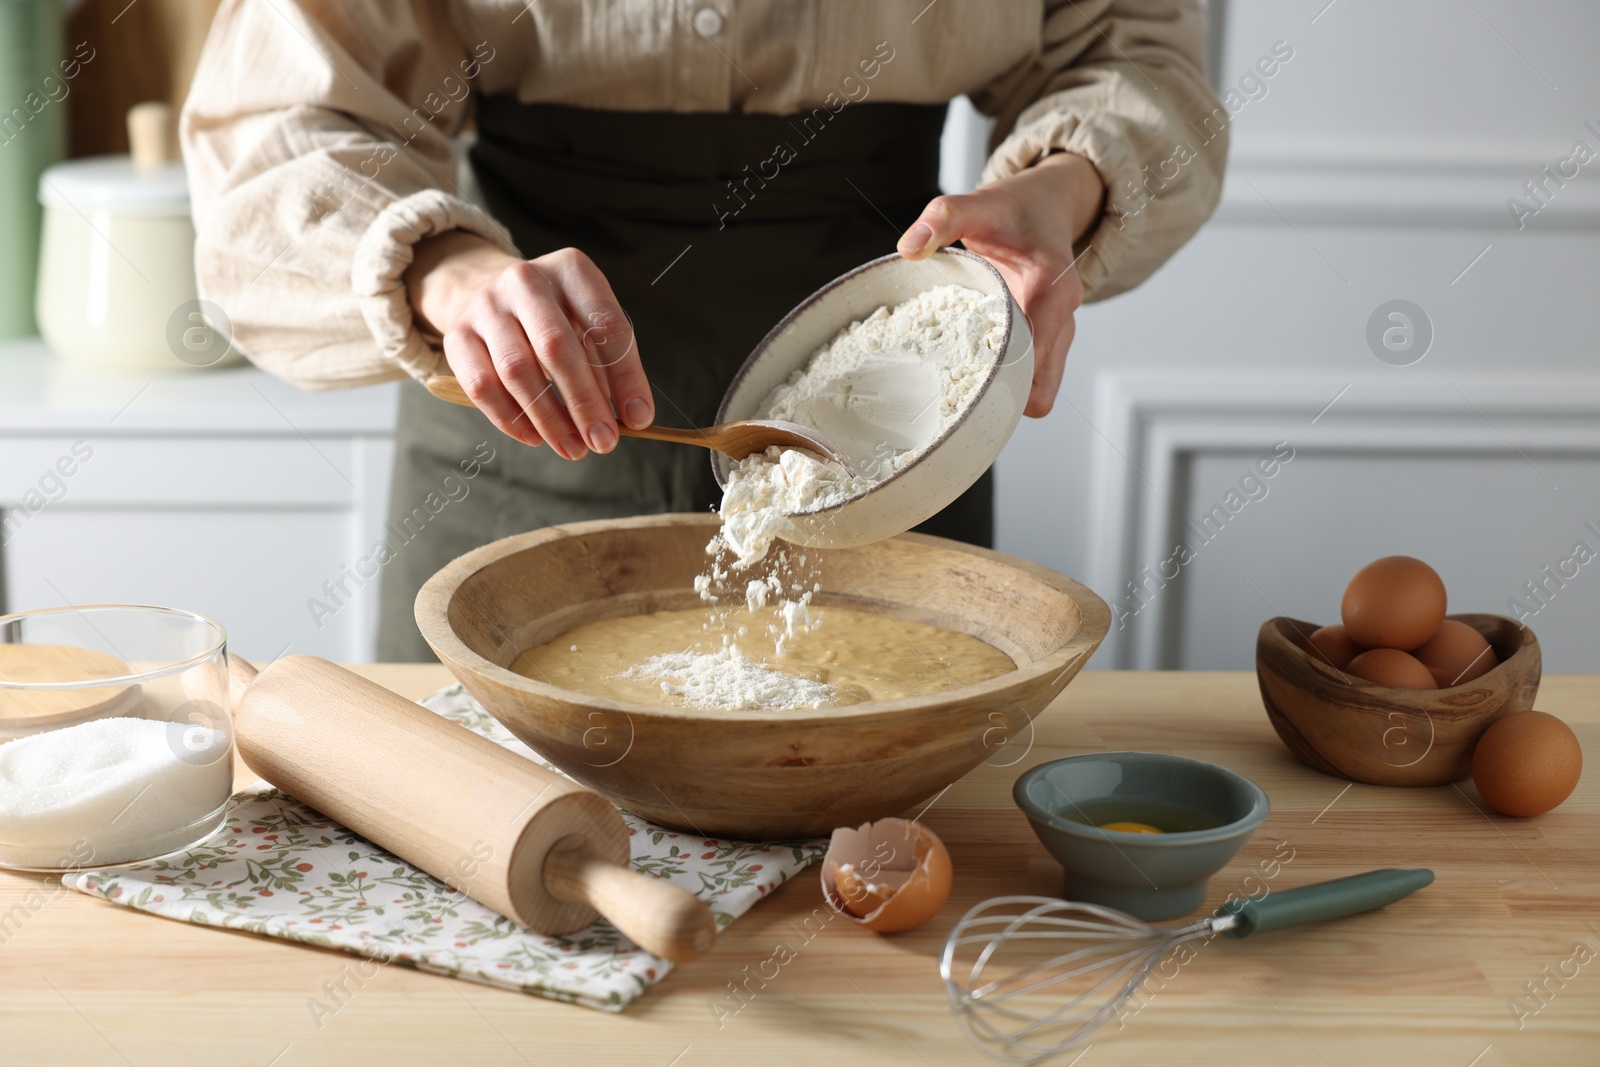 Photo of Making dough. Woman adding flour into bowl at wooden table in kitchen, closeup